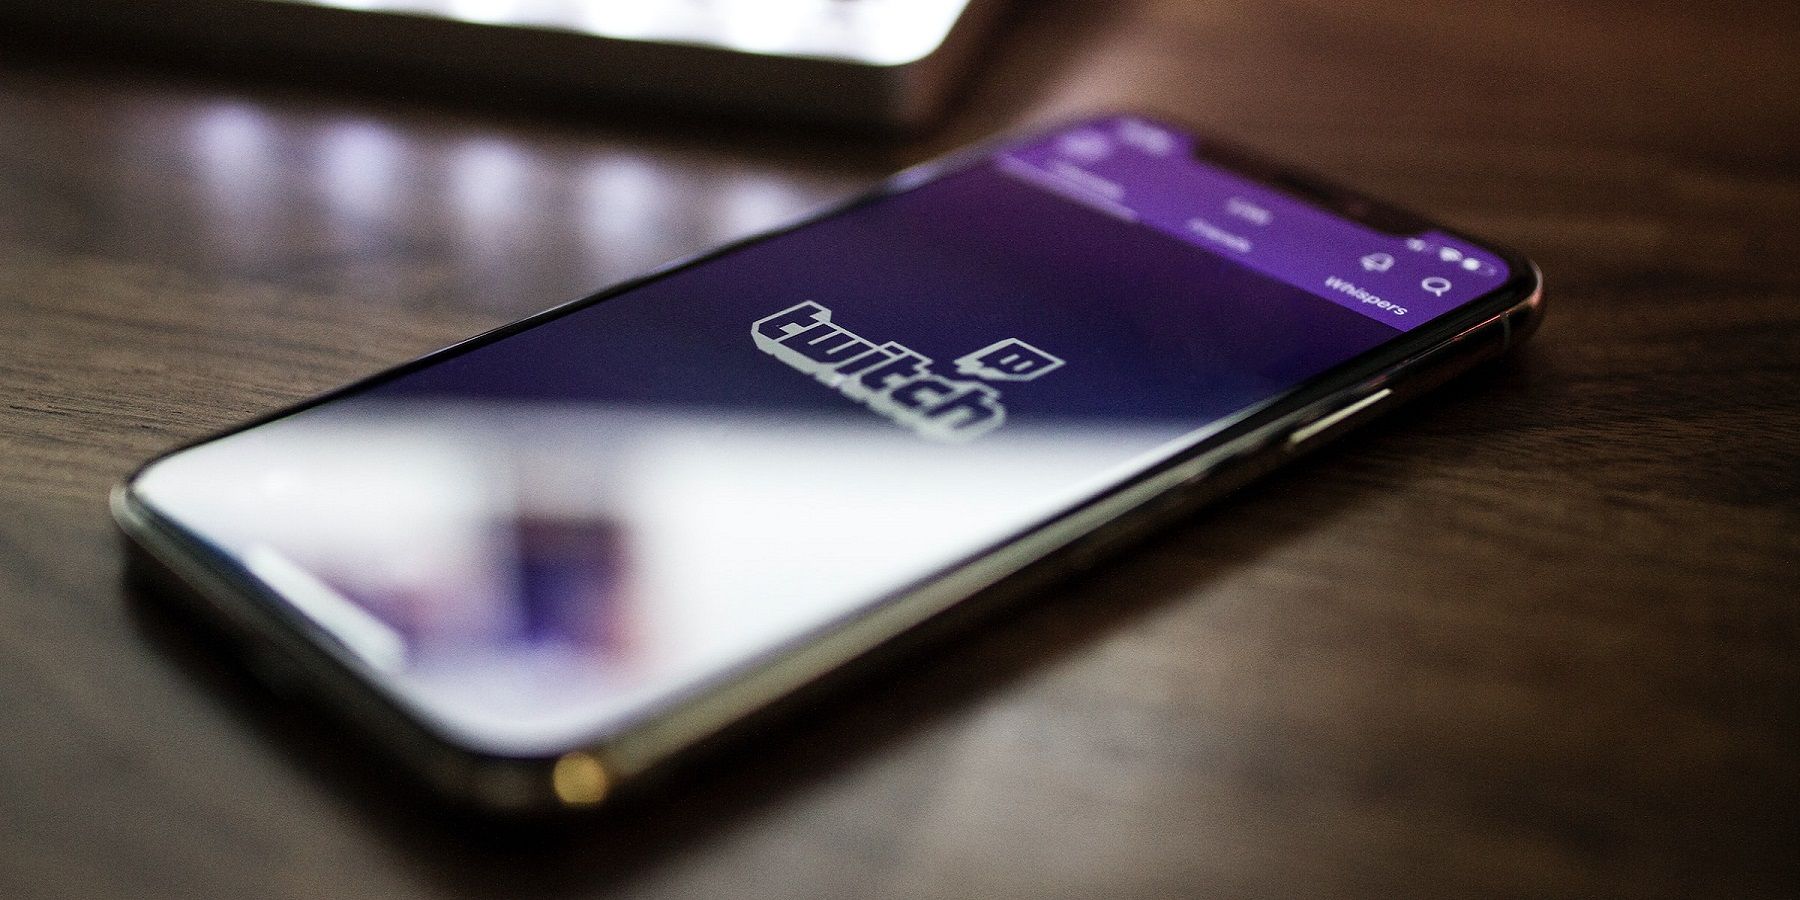 Photo of a phone on a desk, with the Twitch logo on the phone's screen.